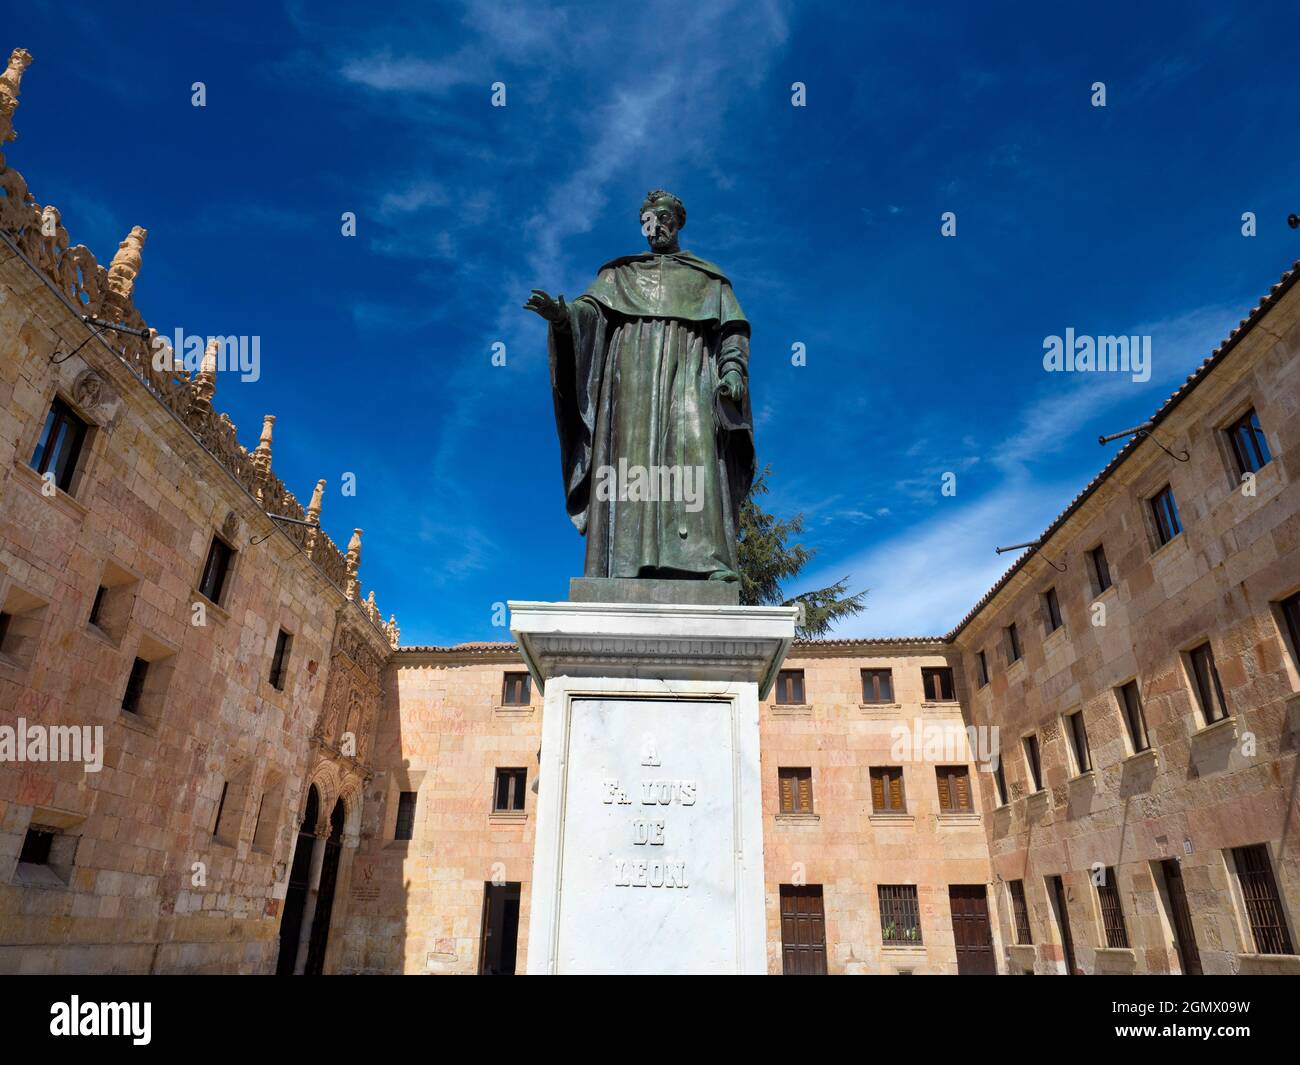 Salamanca, Spain - 13 April 2017; no people in view. Fray Luis de Leon was a famous Spanish lyric poet, Augustinian friar, theologian and academic, wh Stock Photo